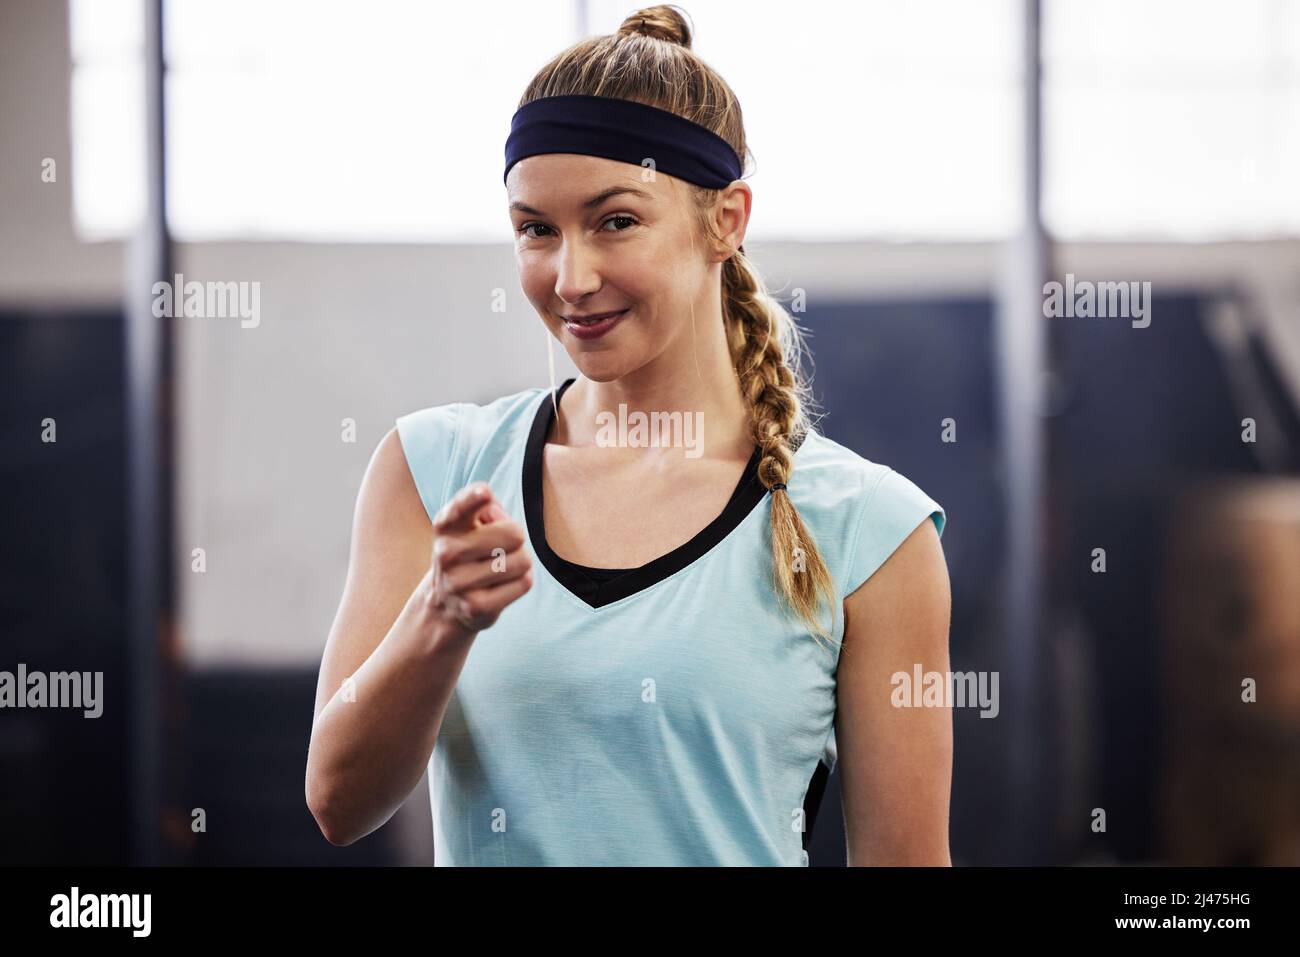 Im looking forward to seeing you at the gym. Shot of a fit young woman at the gym for a workout. Stock Photo